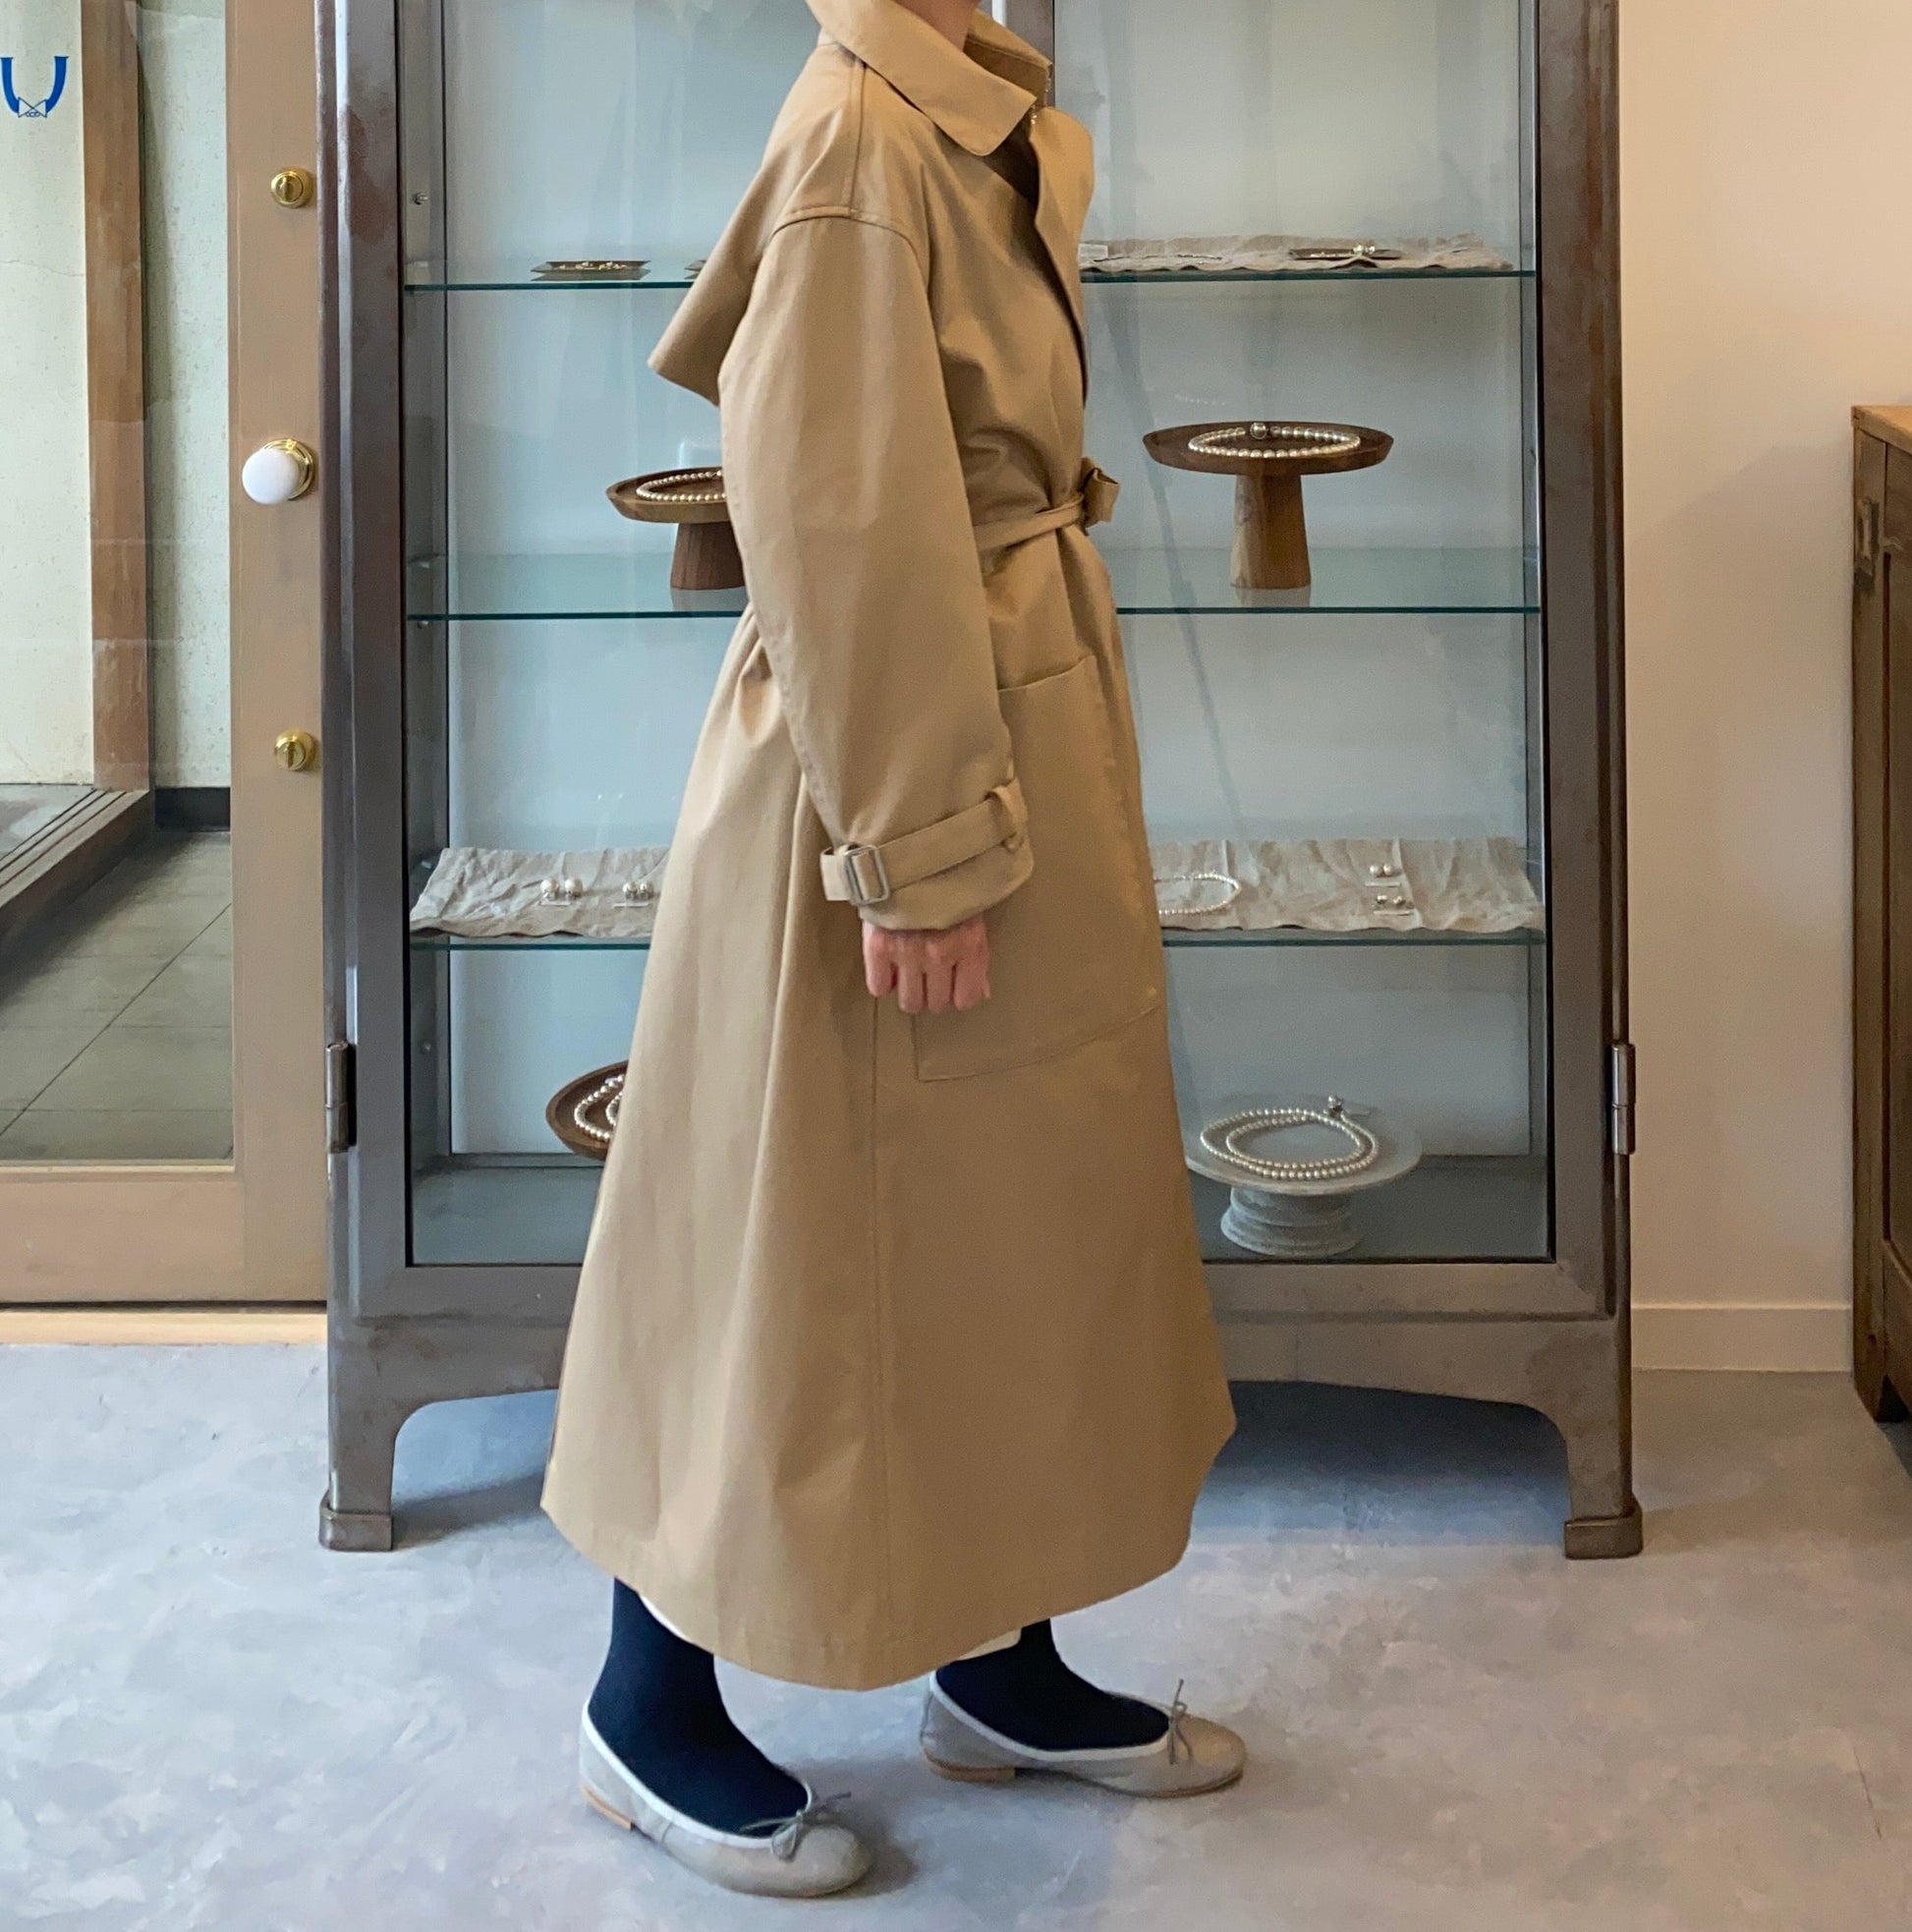 Big size trench coat　TENNE HANDCRAFTED MODERN　通販